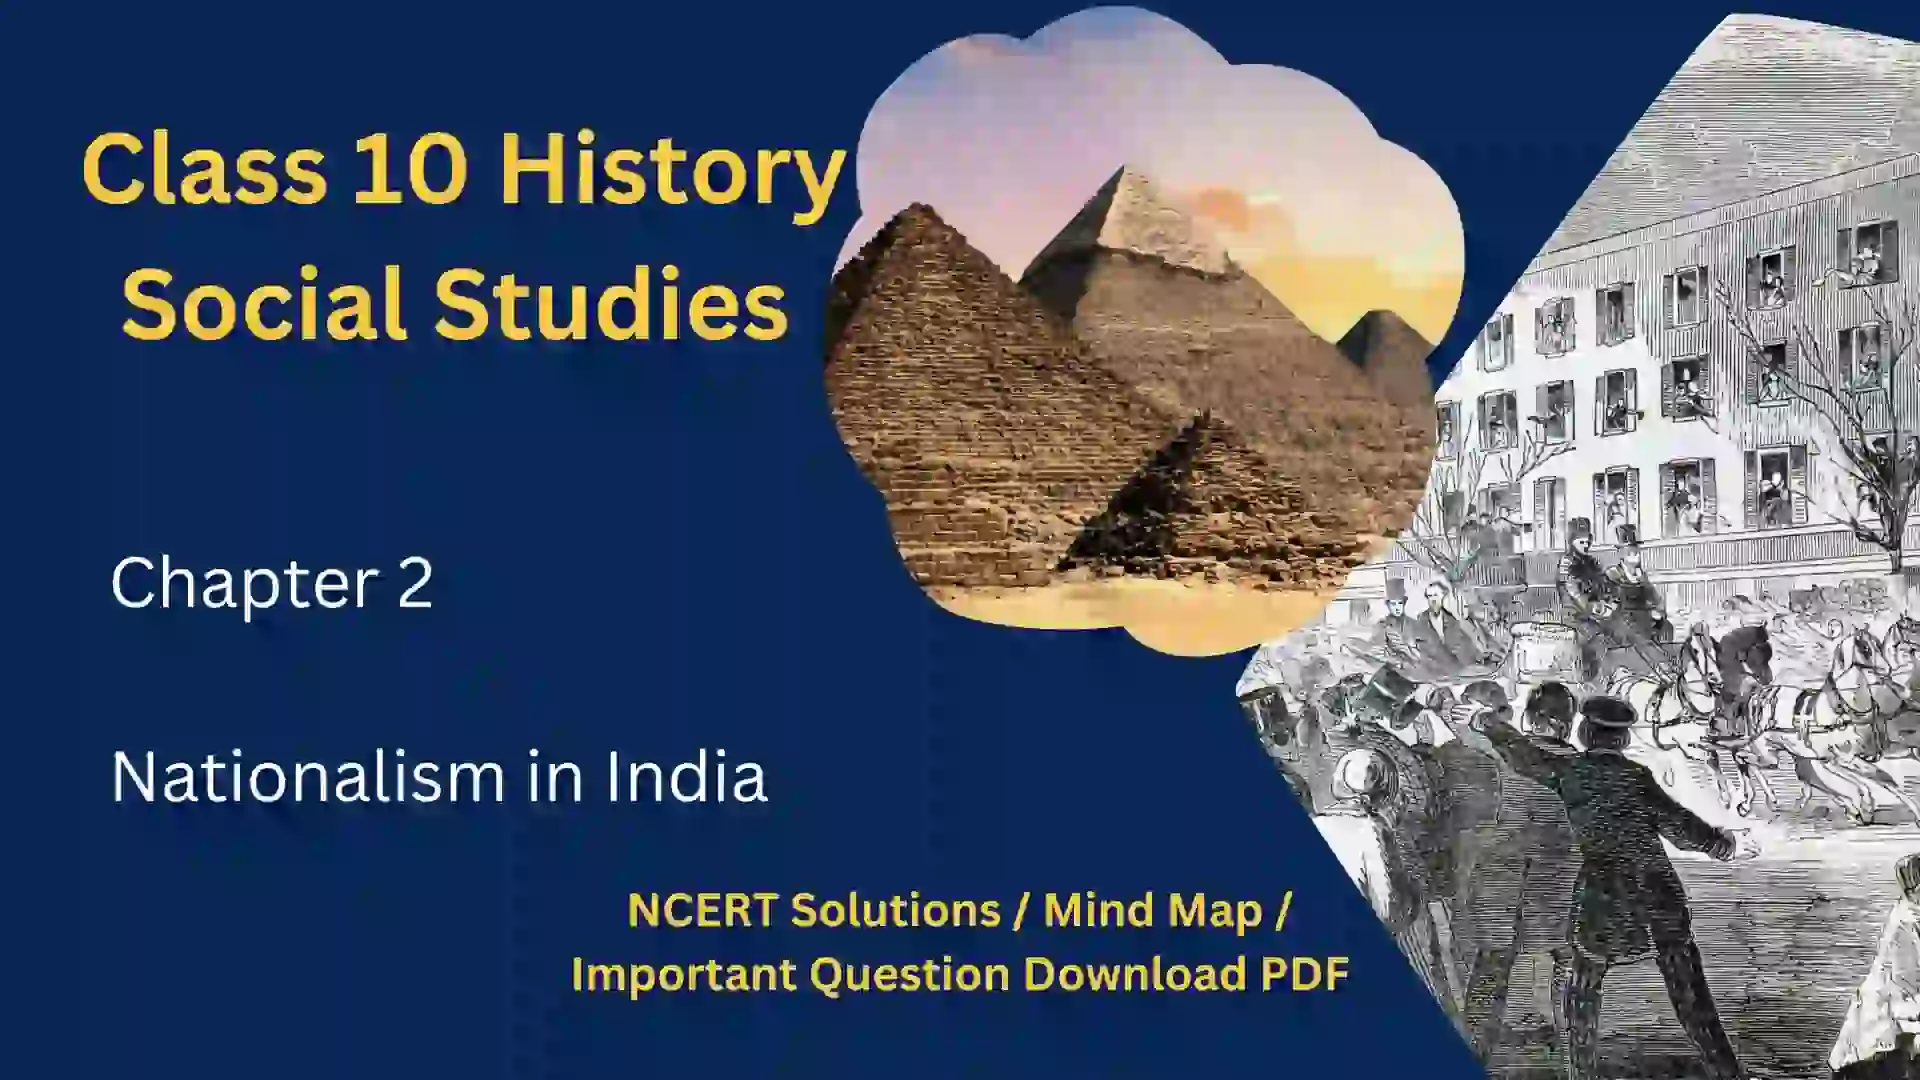 Class 10 Social Studies History Chapter 2 Nationalism in India